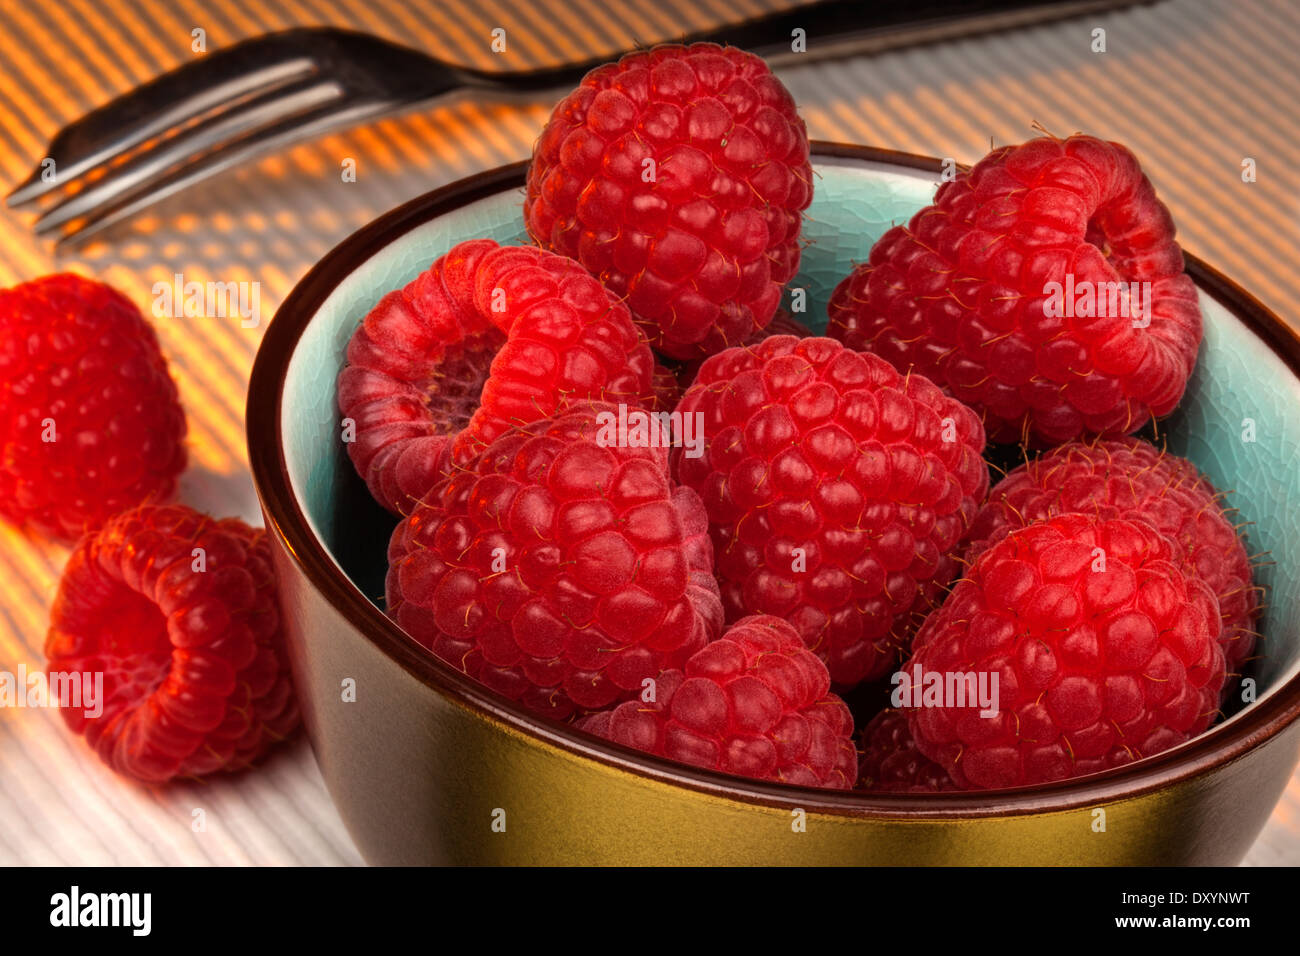 Raspberries are an edible soft fruit related to the blackberry, consisting of a cluster of reddish-pink drupelets. Stock Photo